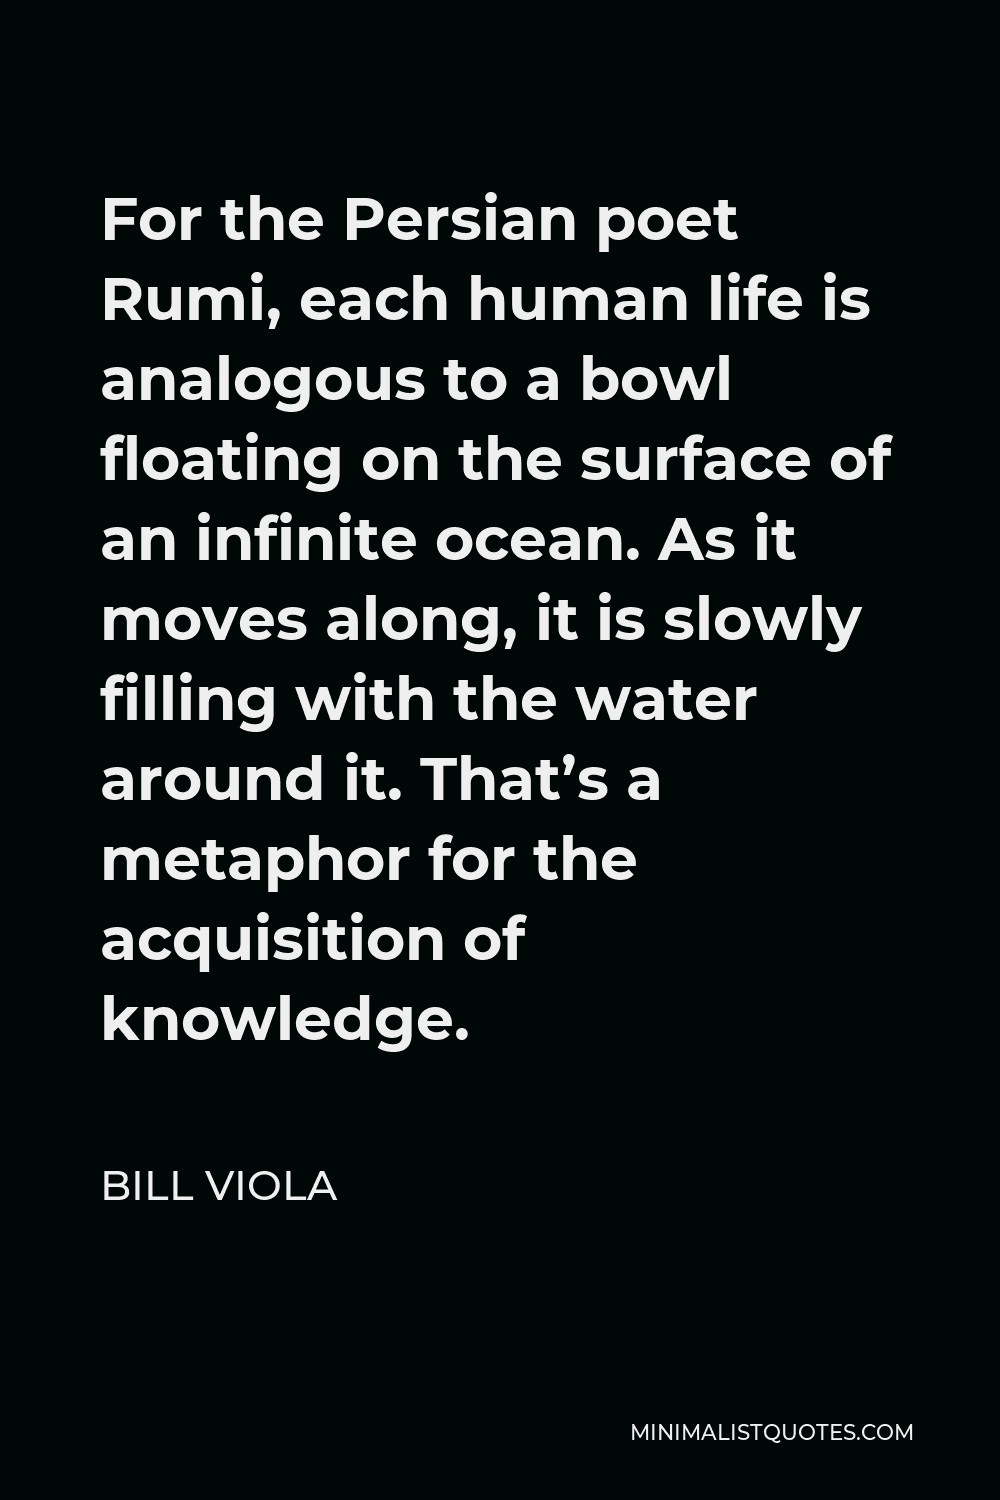 Bill Viola Quote - For the Persian poet Rumi, each human life is analogous to a bowl floating on the surface of an infinite ocean. As it moves along, it is slowly filling with the water around it. That’s a metaphor for the acquisition of knowledge.